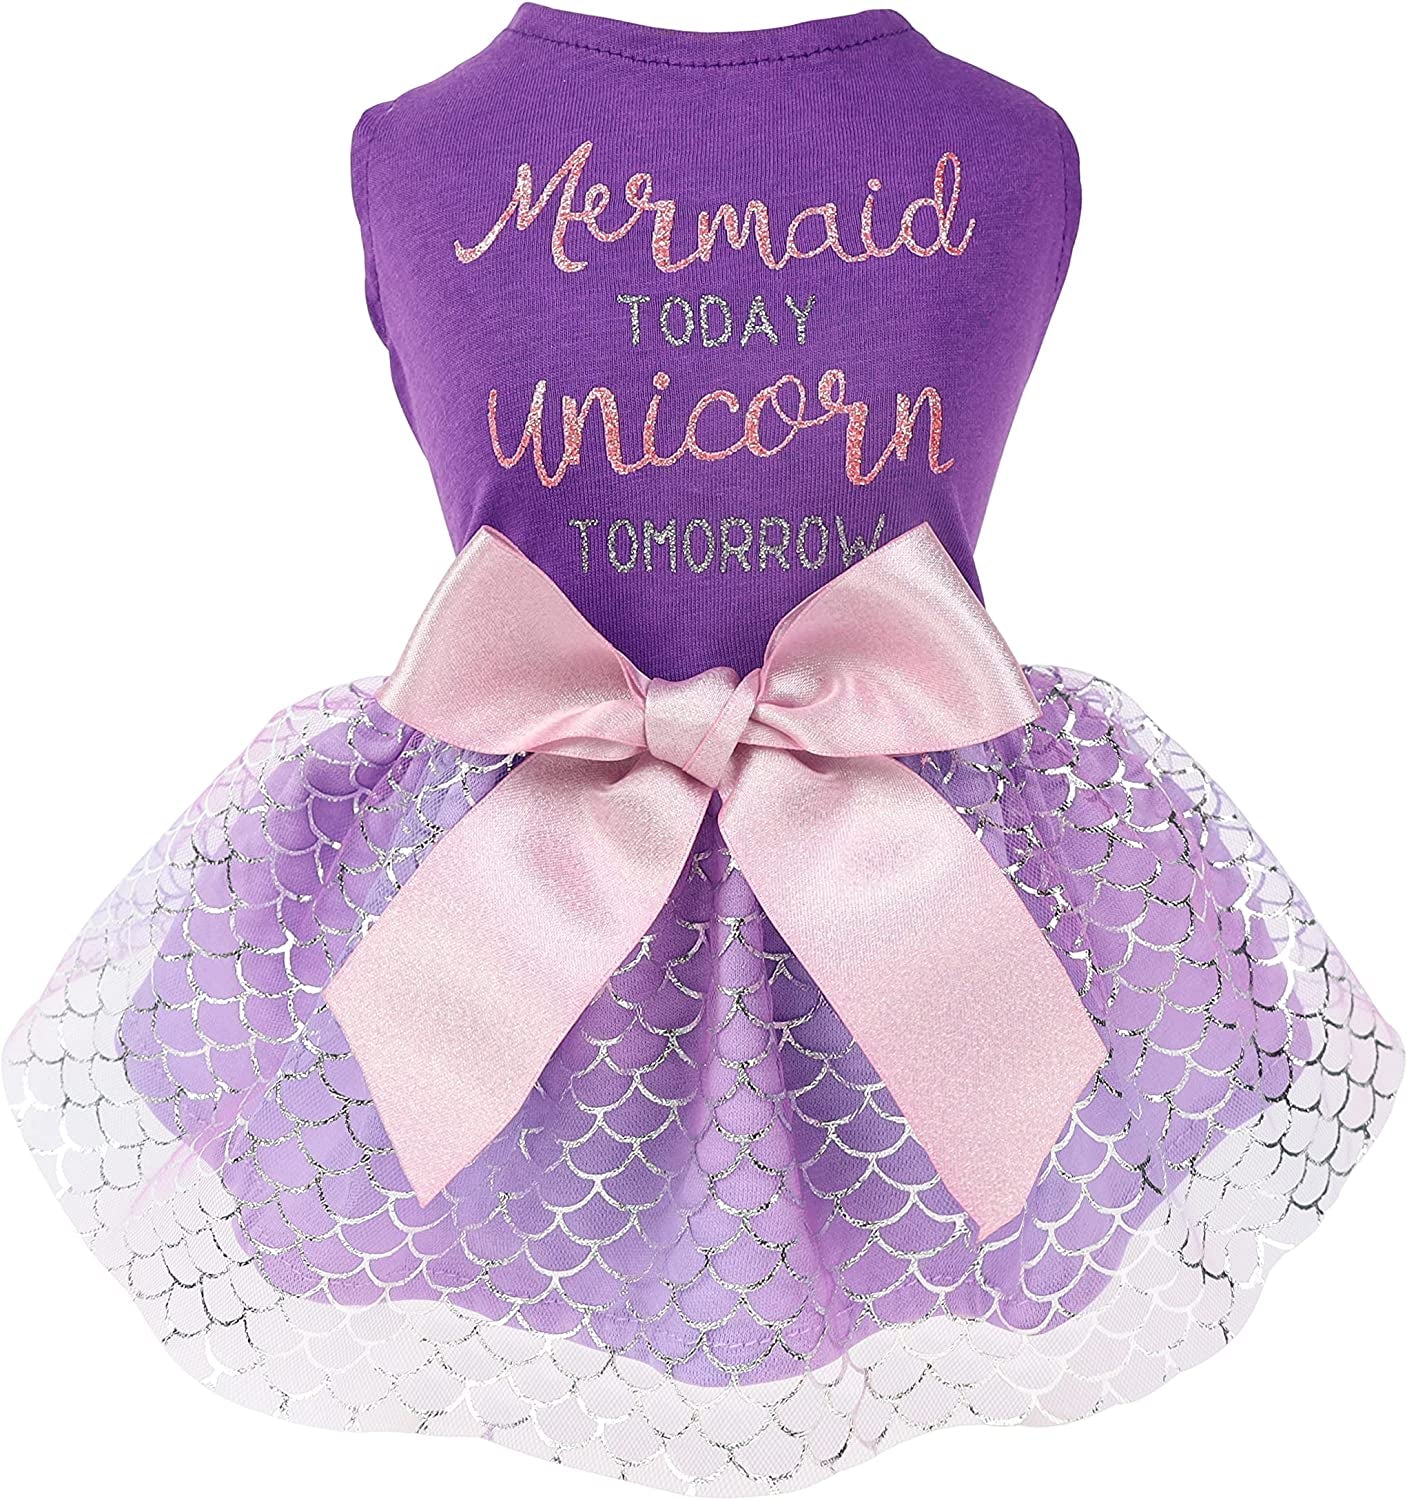 Fitwarm Hocus Pocus Y’All Halloween Dog Tulle Dress, Holiday Theme Costumes, Dog Clothes for Small Dogs Girl, Cat Apparel, Black, Medium Animals & Pet Supplies > Pet Supplies > Dog Supplies > Dog Apparel Fitwarm Mermaid Today Unicorn Tomorrow XX-Small 